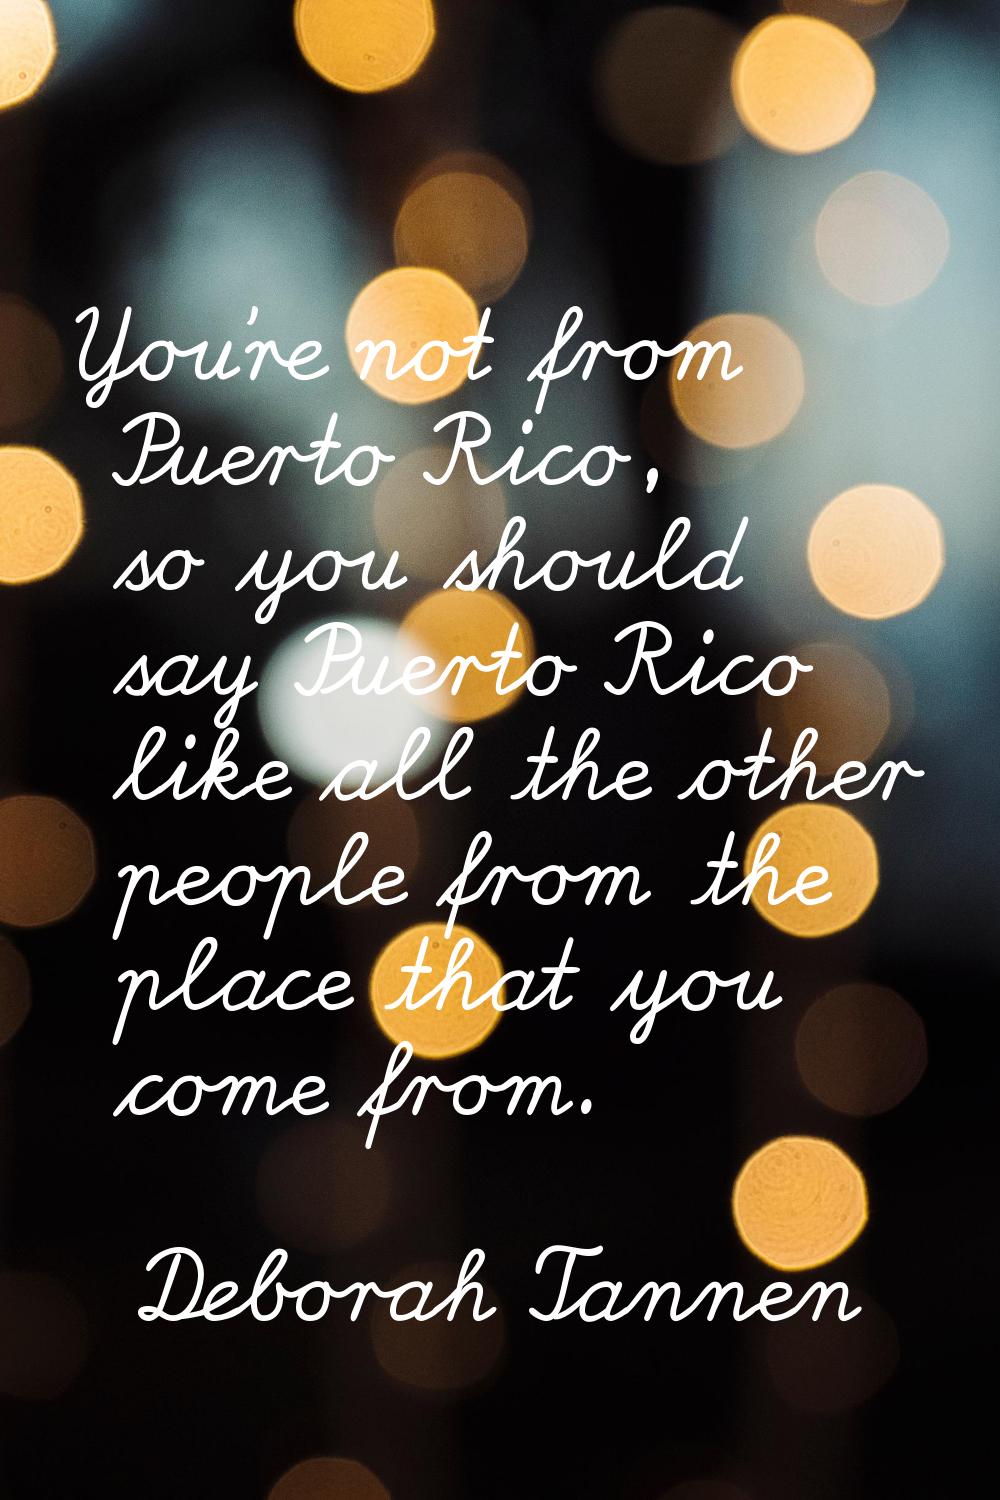 You're not from Puerto Rico, so you should say Puerto Rico like all the other people from the place